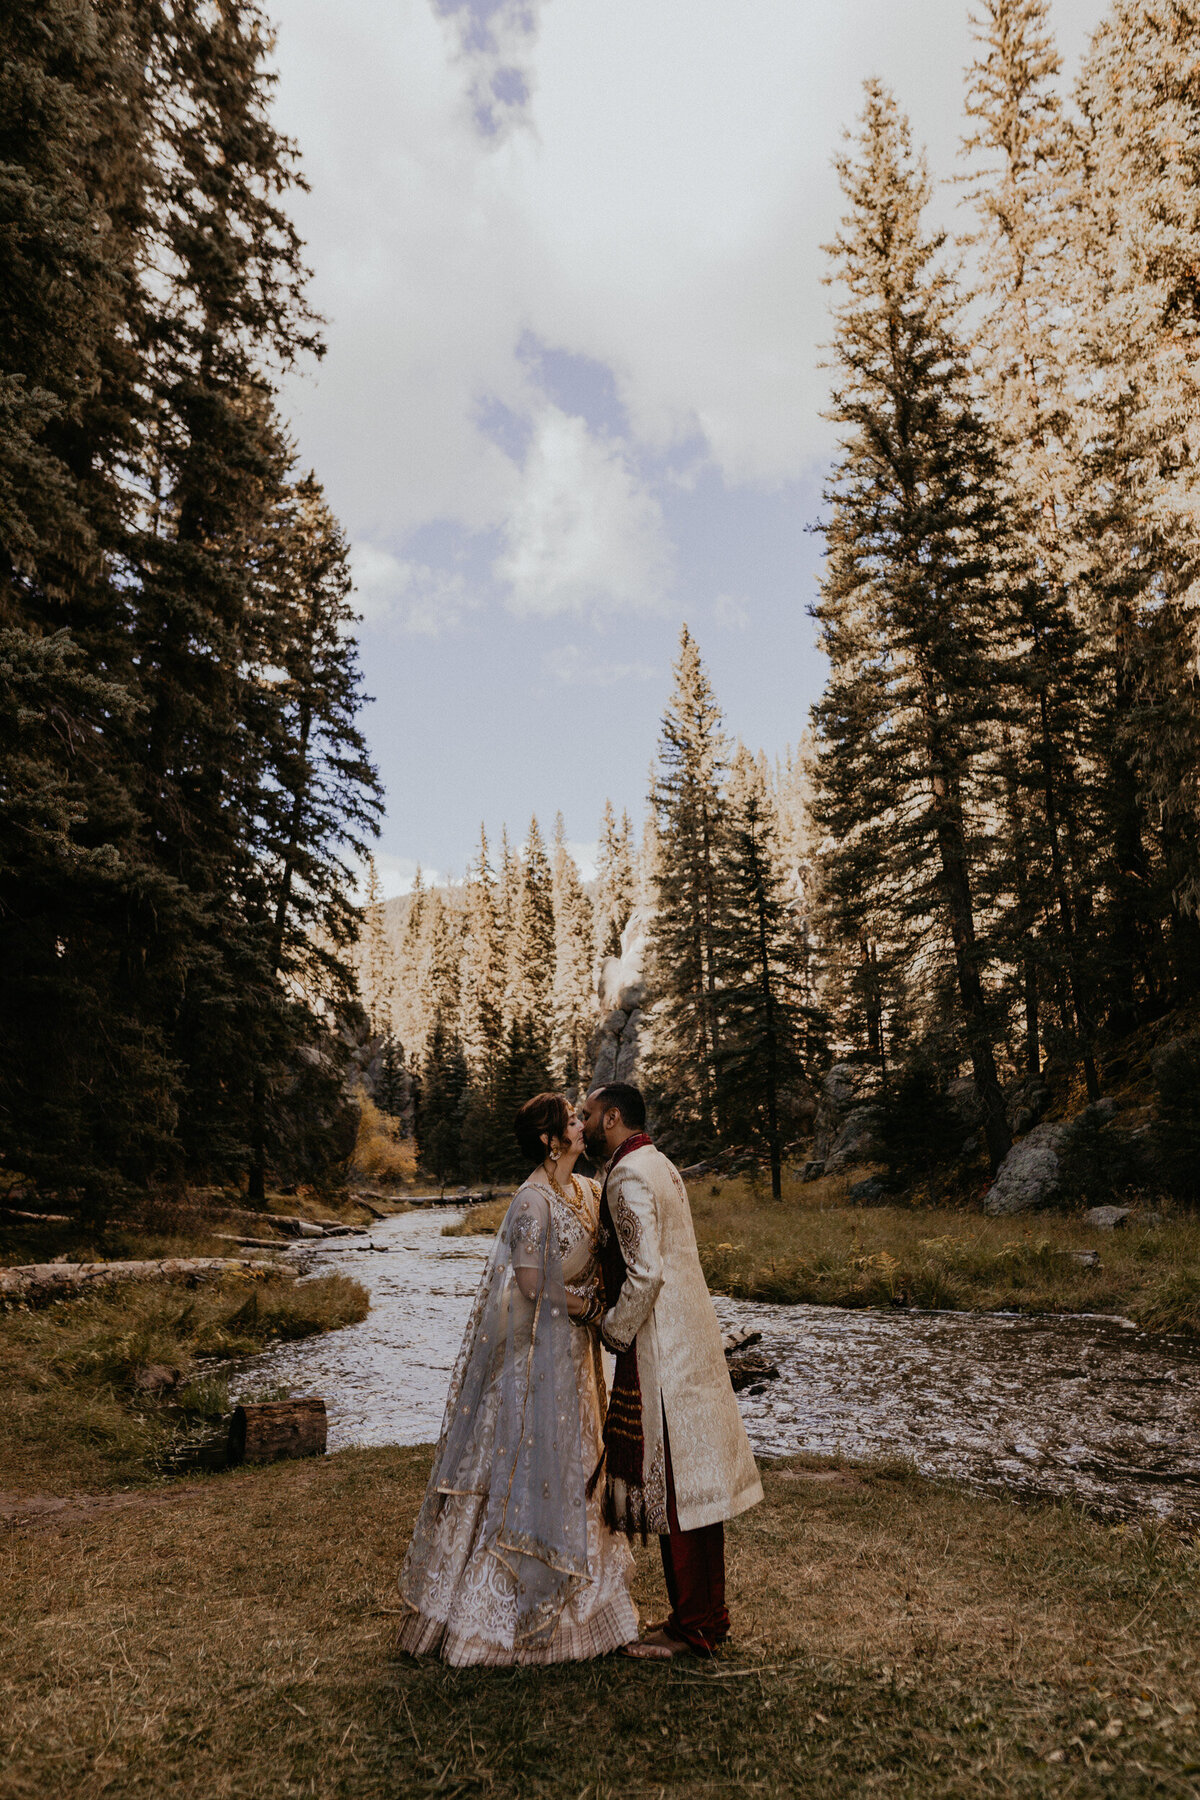 bride and groom in Indian attire holding each other in front of a creek in NM